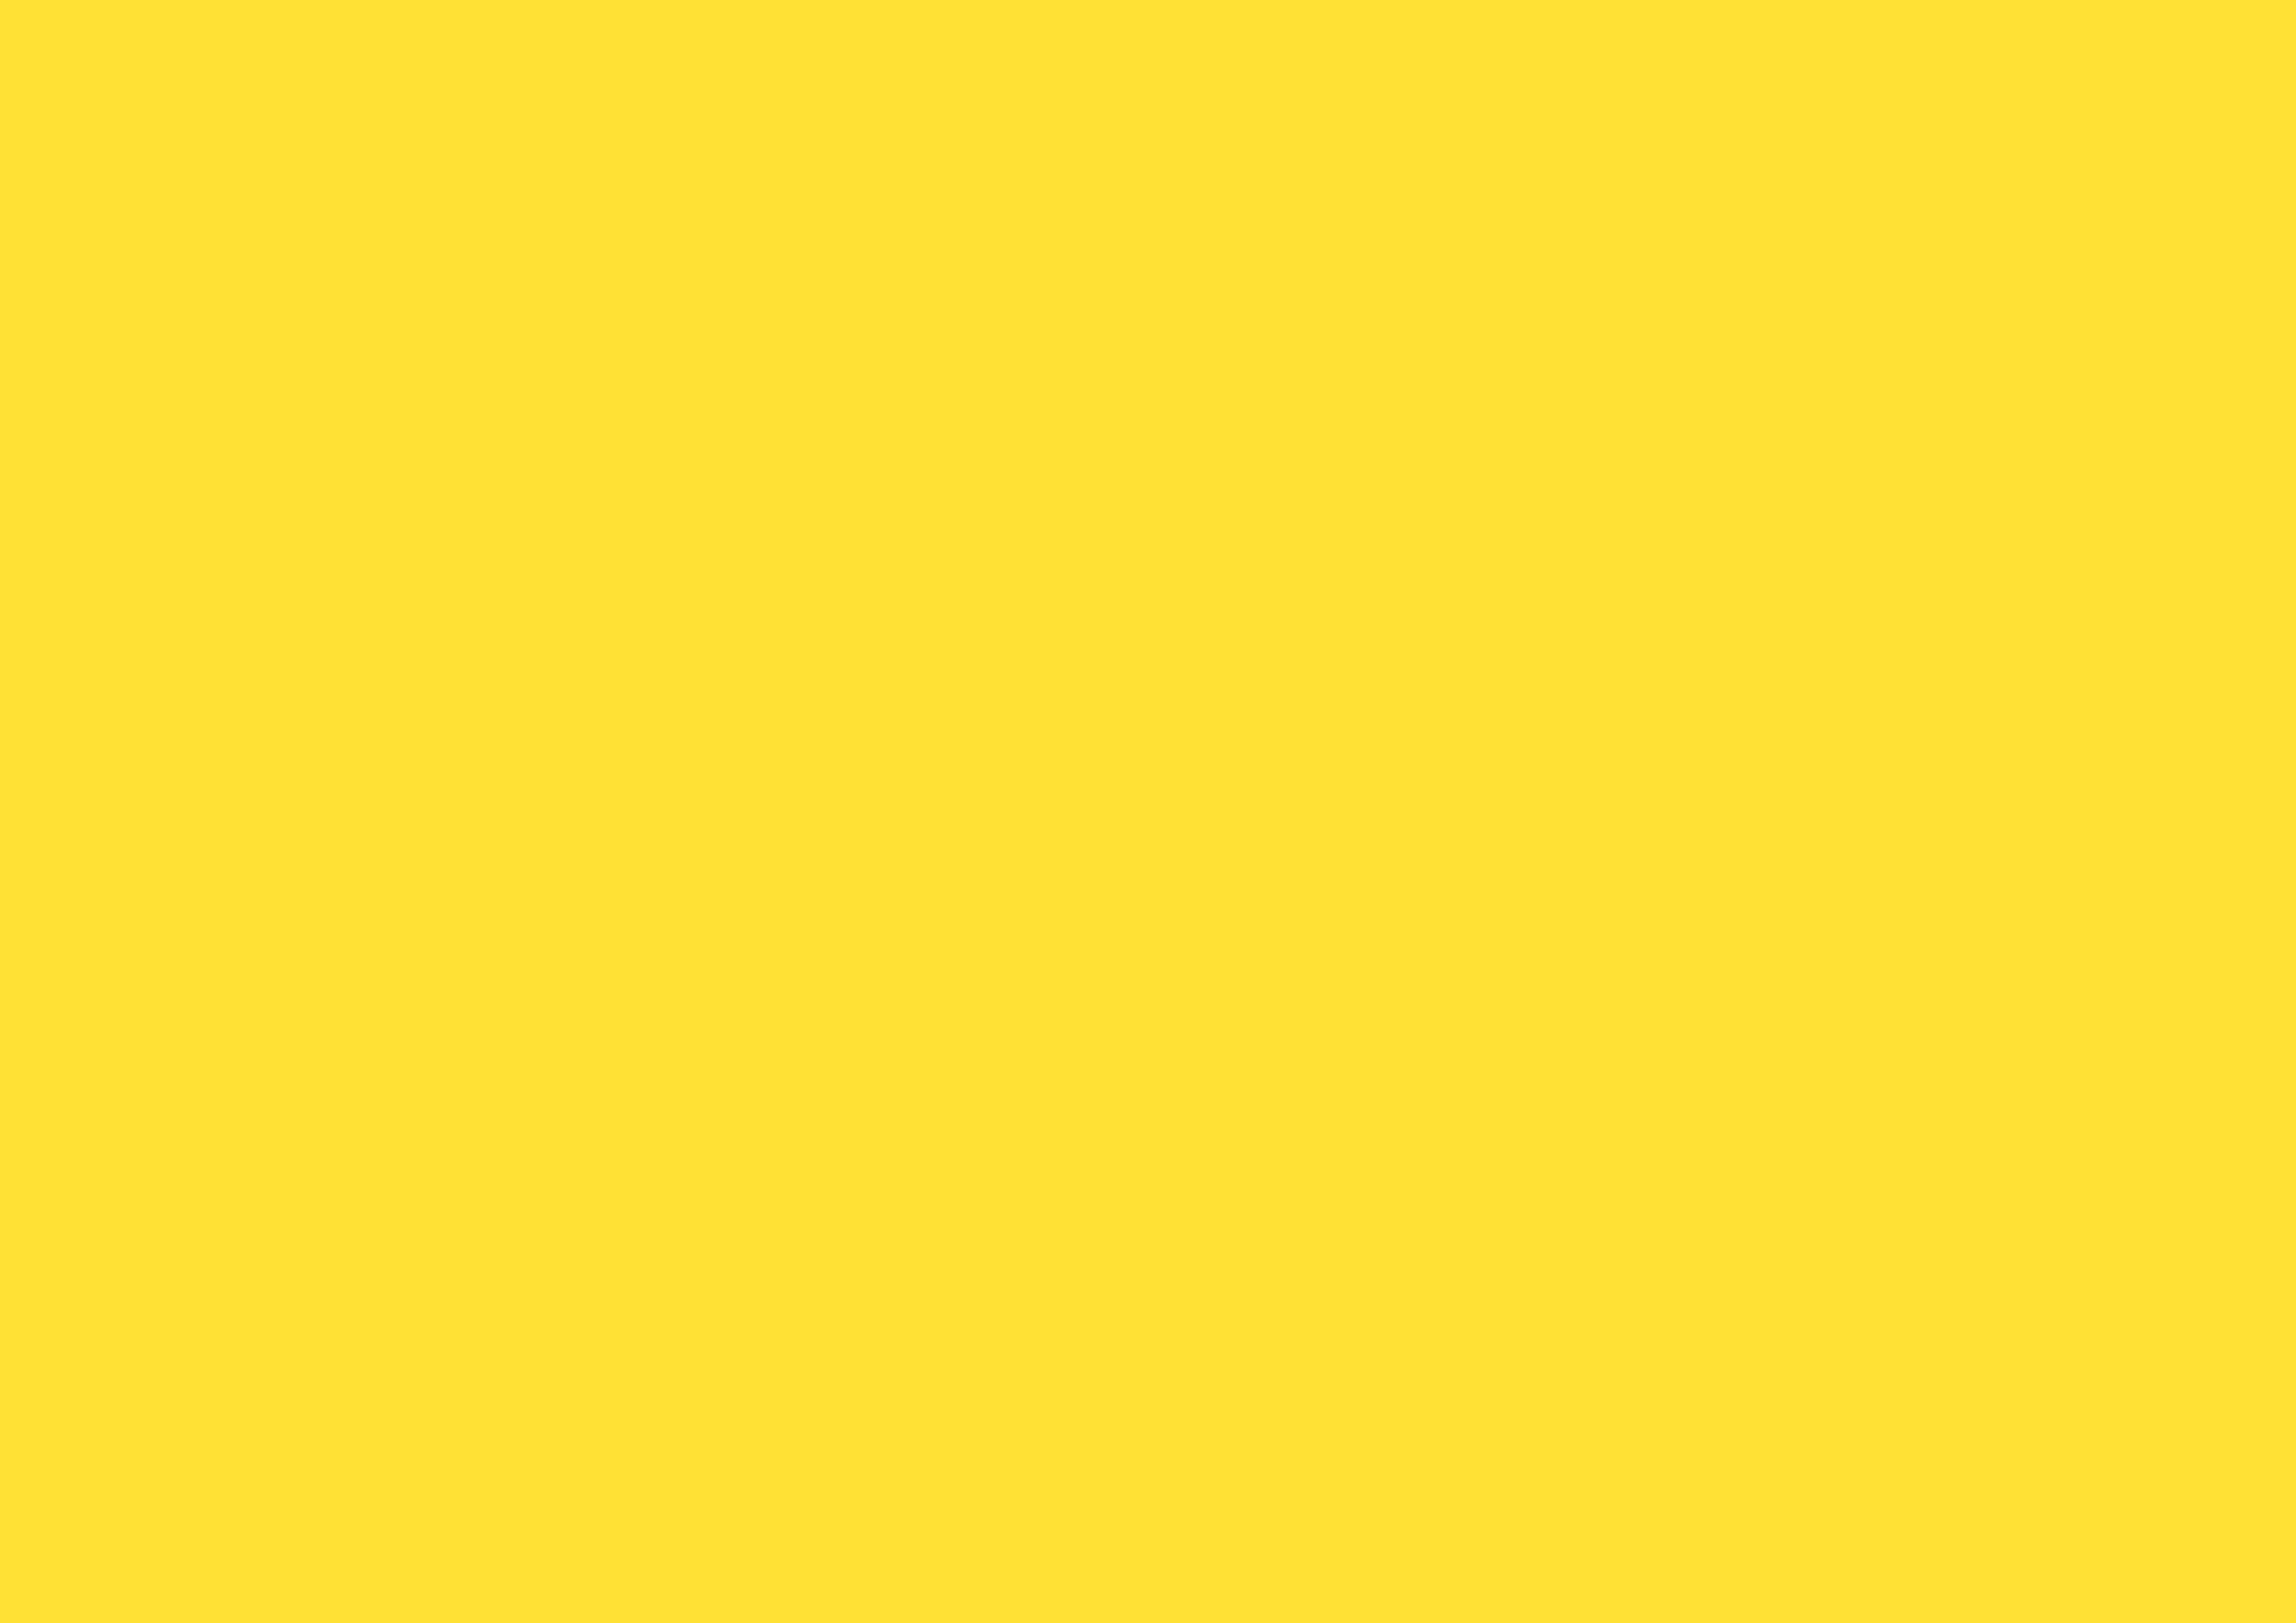 3508x2480 Banana Yellow Solid Color Background